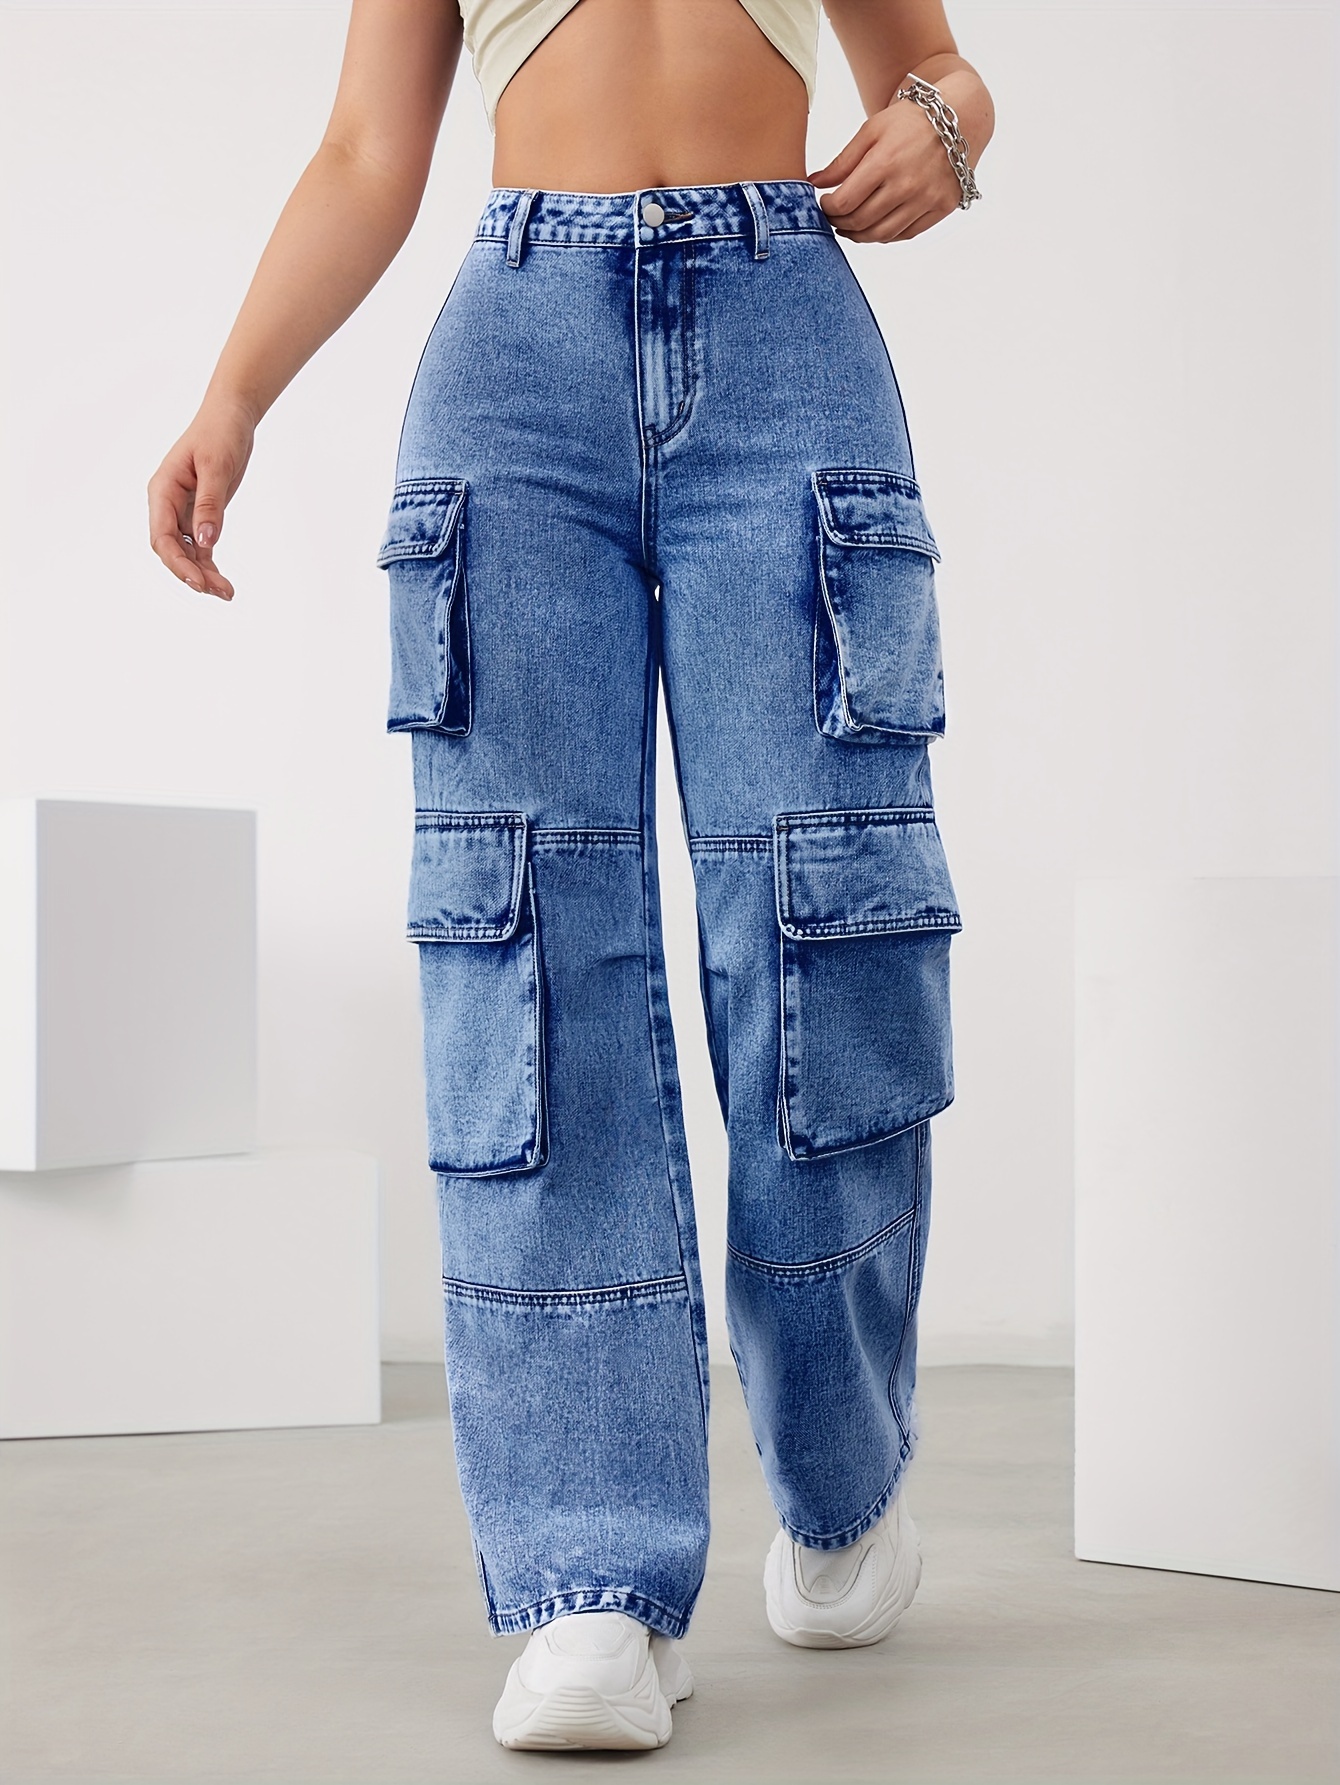 Haruku Style High Waist Denim Wide Leg Cargo Jeans With Elastic Pocket For  Women And Girls From Ltyy168, $40.11